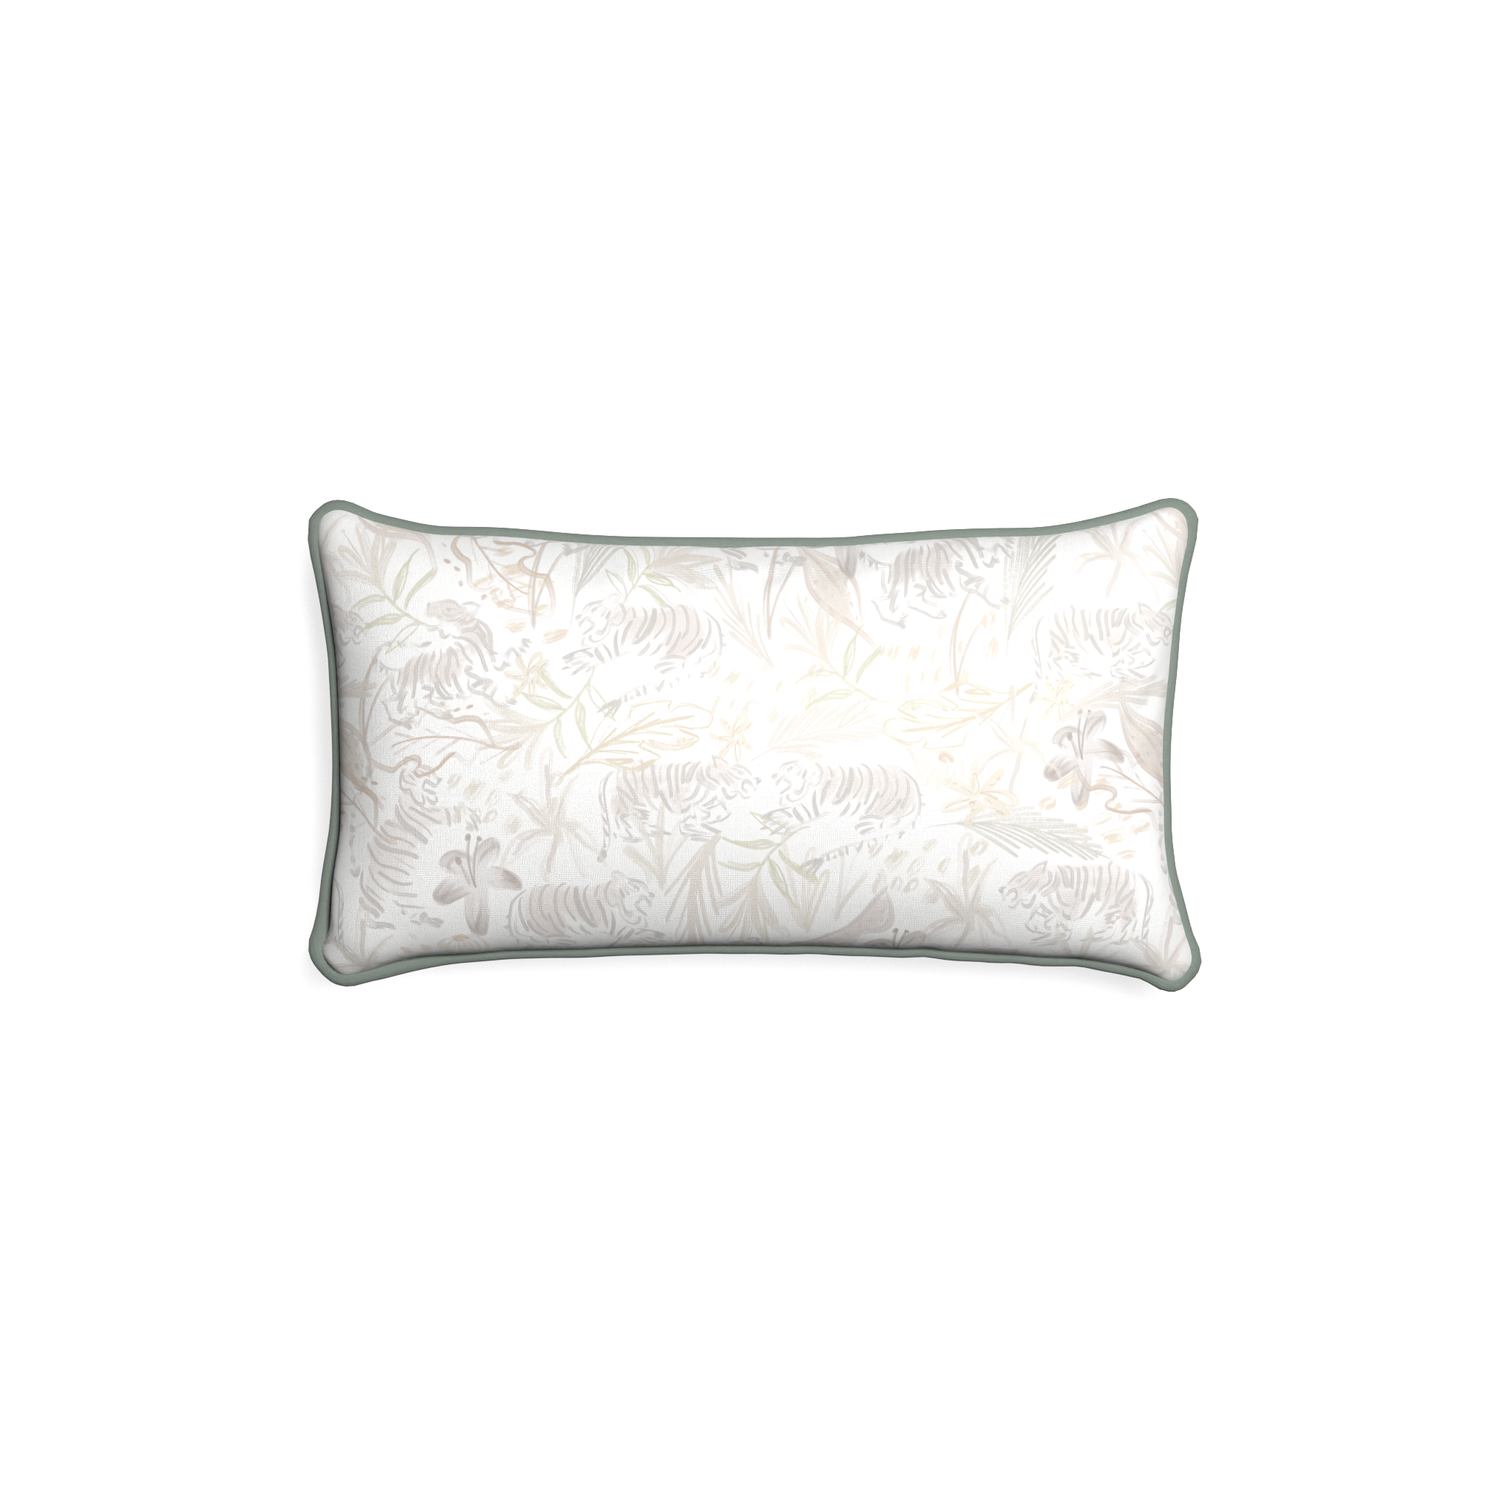 Petite-lumbar frida sand custom beige chinoiserie tigerpillow with sage piping on white background